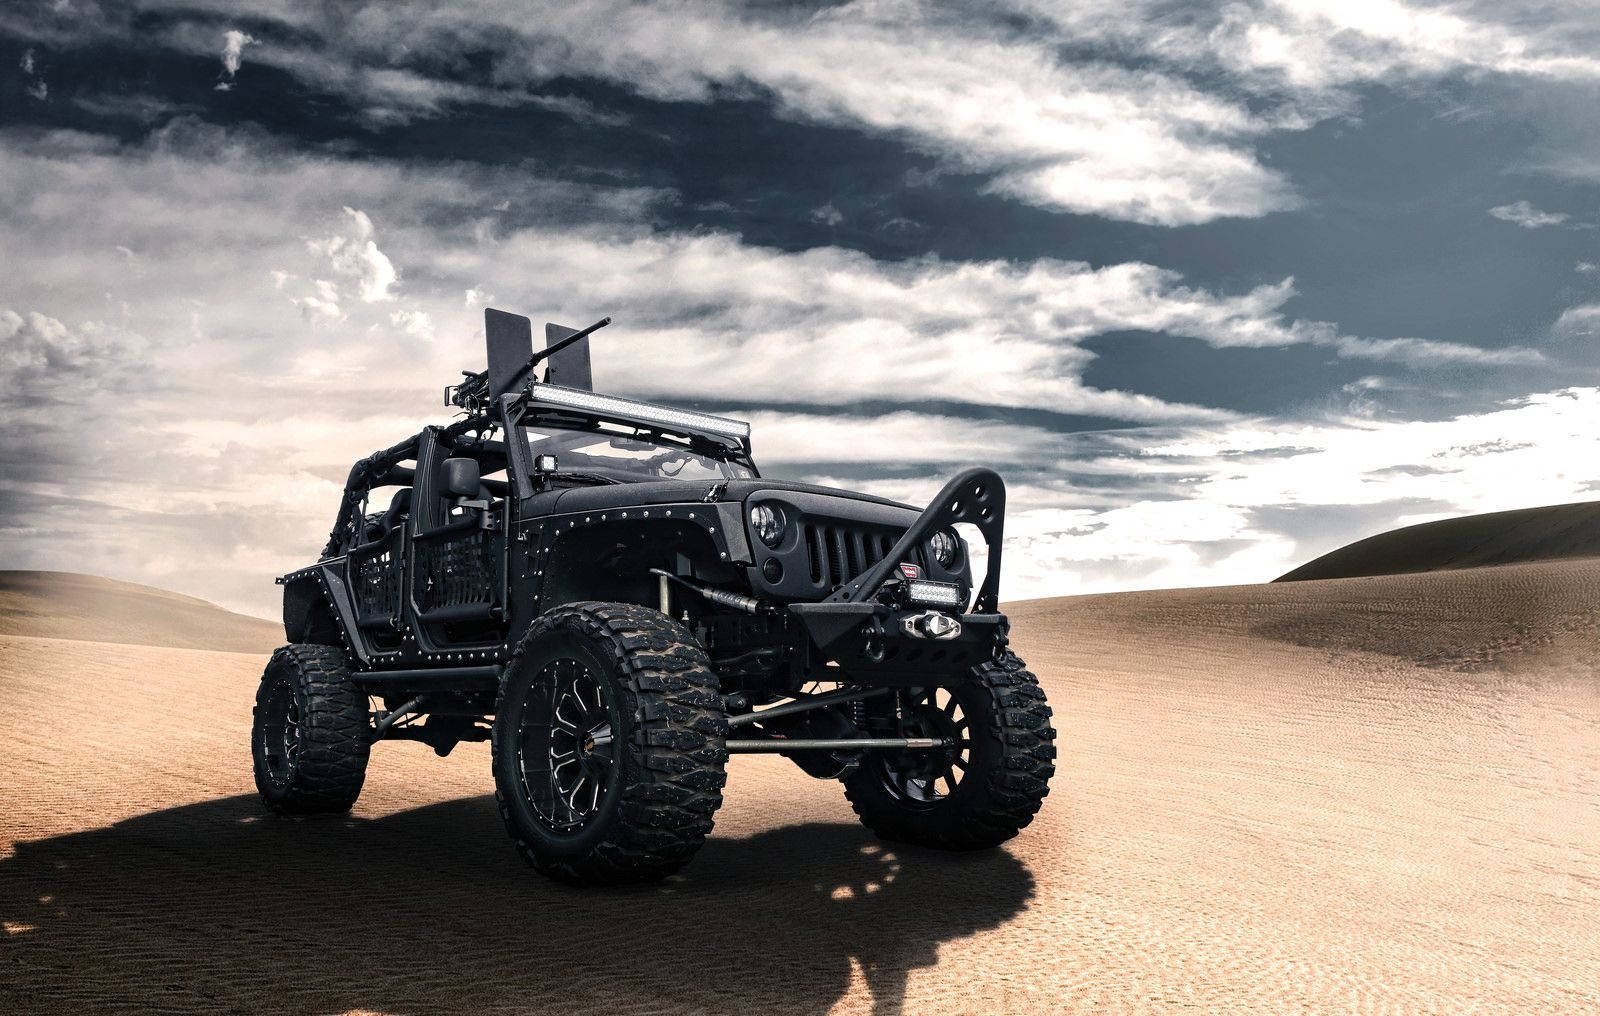 Rugged Black Jeep In The Wilderness Wallpaper